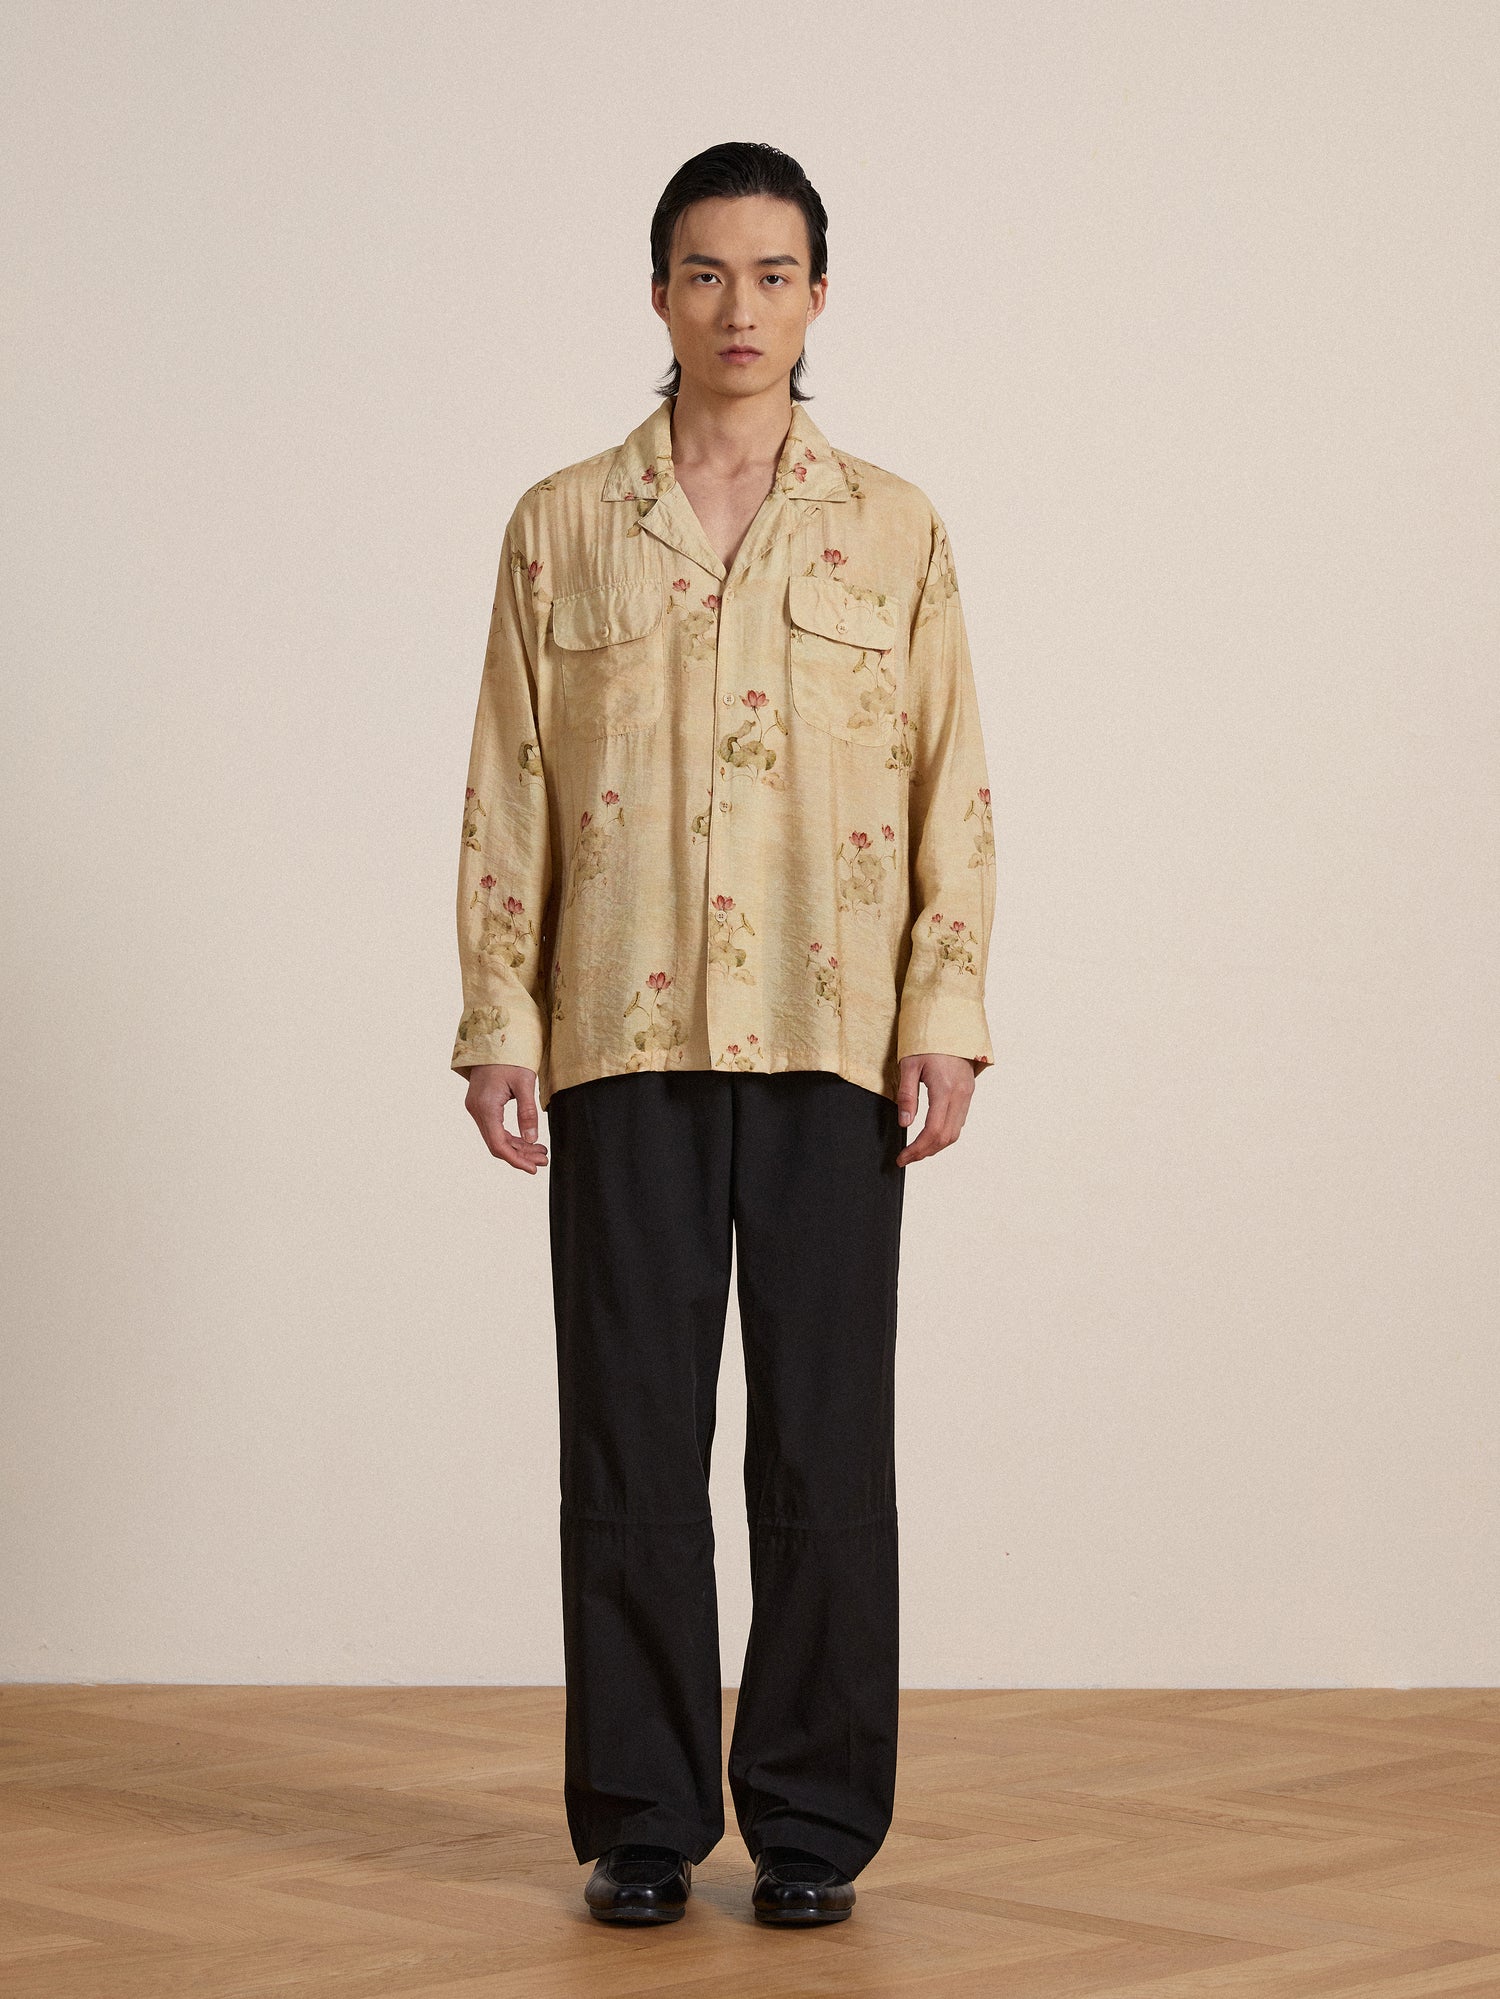 Asian man in a studio wearing a beige floral shirt and black Found Tencel pleated pants, standing with a neutral expression.